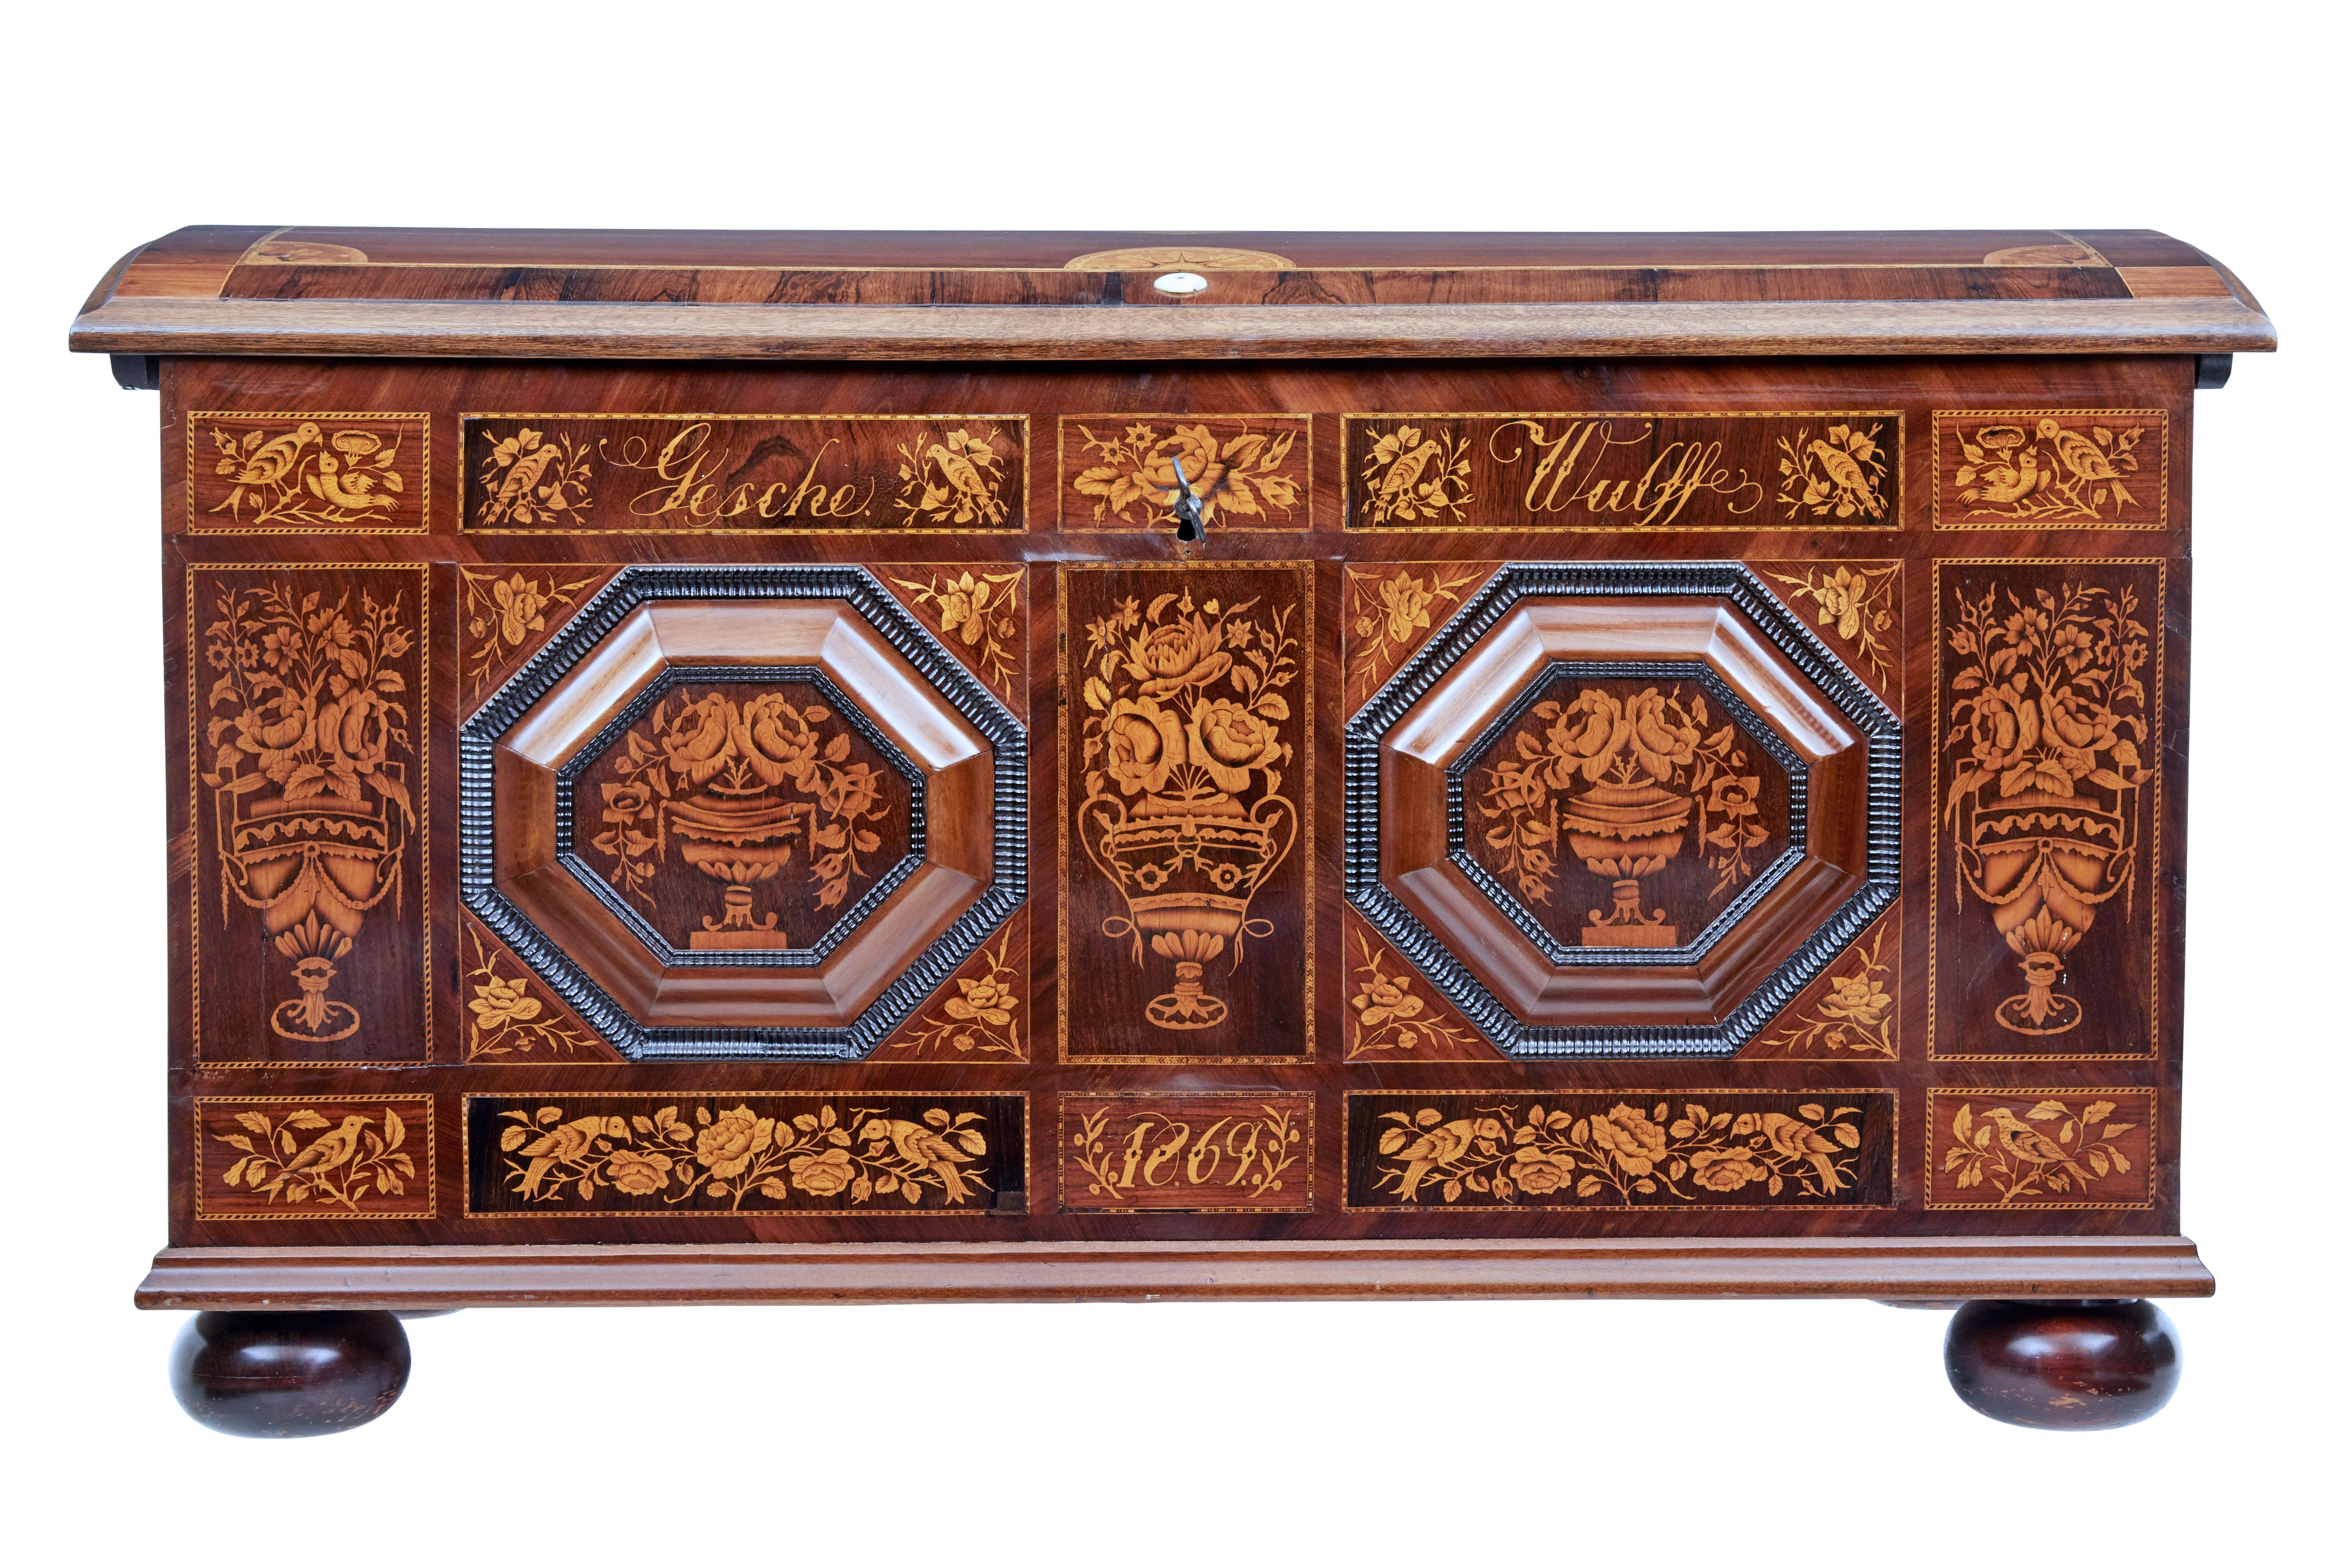 Beautiful inlaid dome top chest of the finest quality circa 1869.

Inscribed on the front with the name 'gesche wulff' and dated 1869. Superbly inlaid in satinwood with urns, florals and birds. 2 octagonal raised plaques applied to the front,